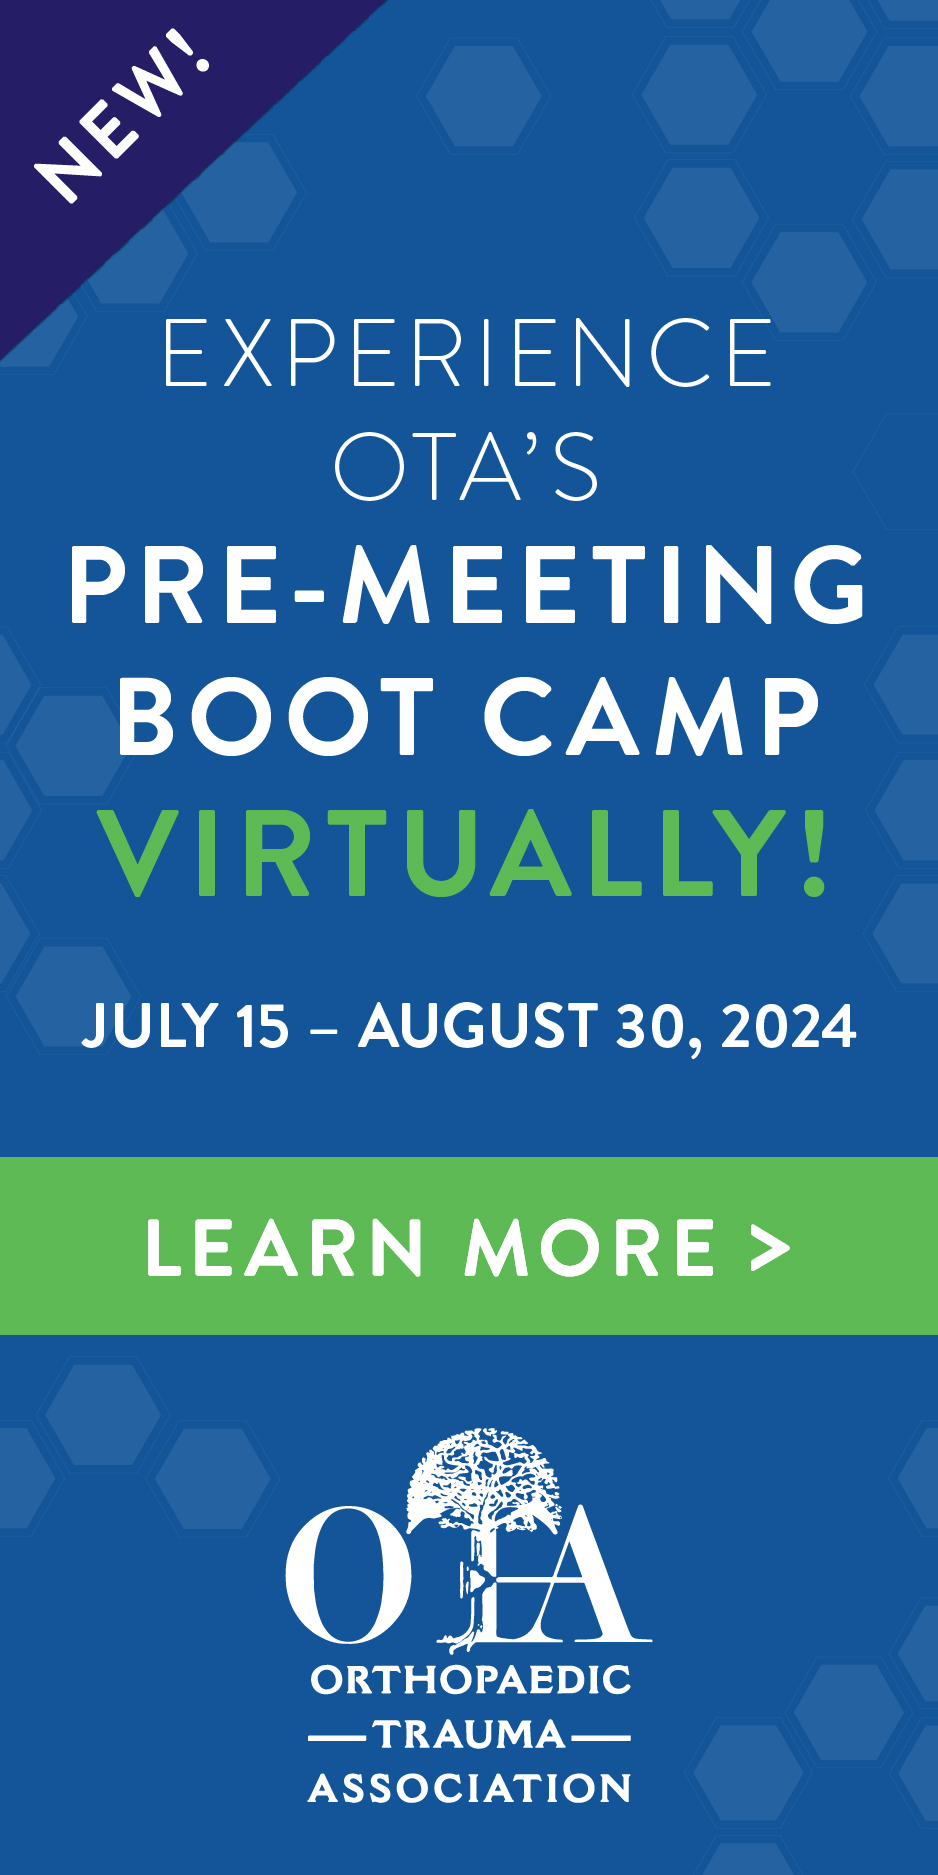 Register for Virtual Boot Camp